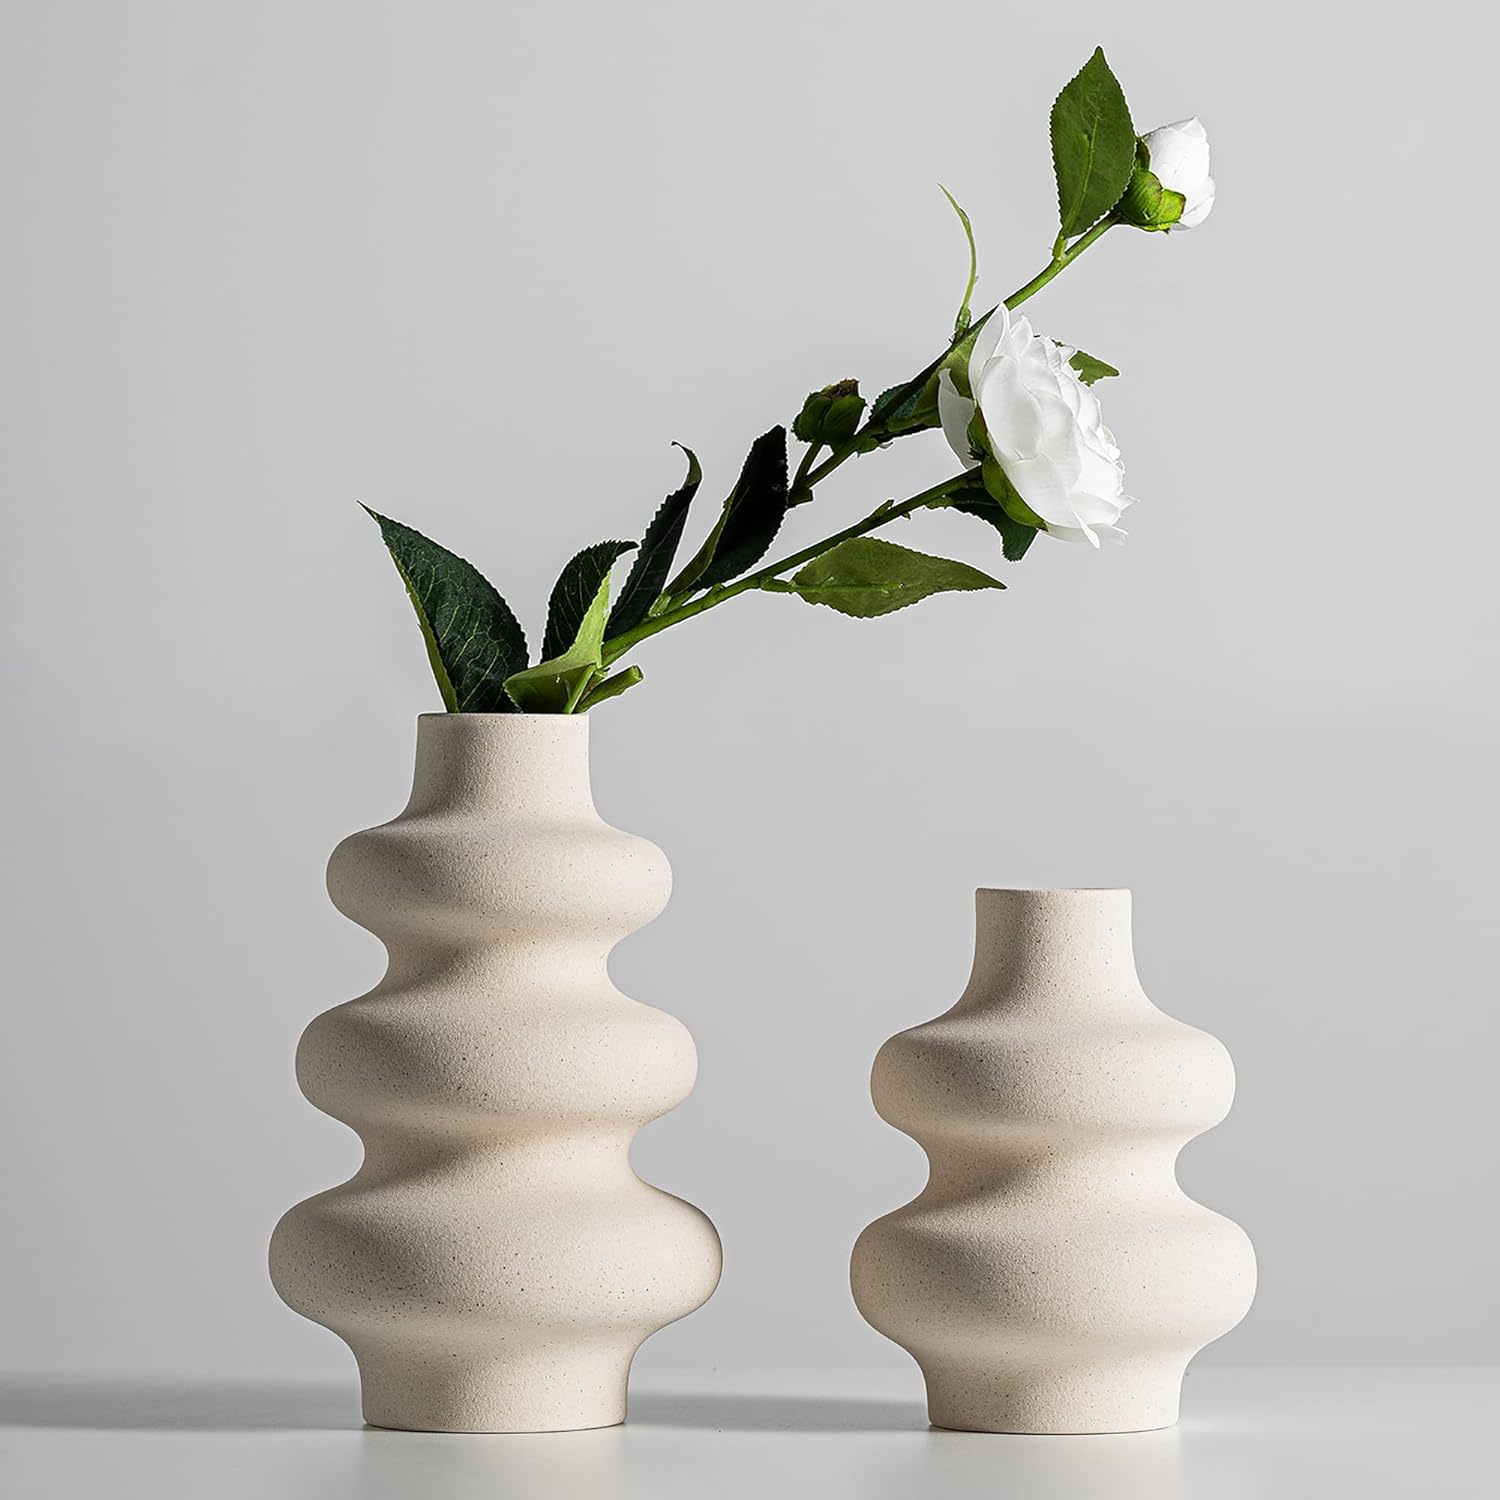 Primary image for Steviieden Ceramic Vases Set 2, Contemporary Dried Flower, Housewarming Gift.